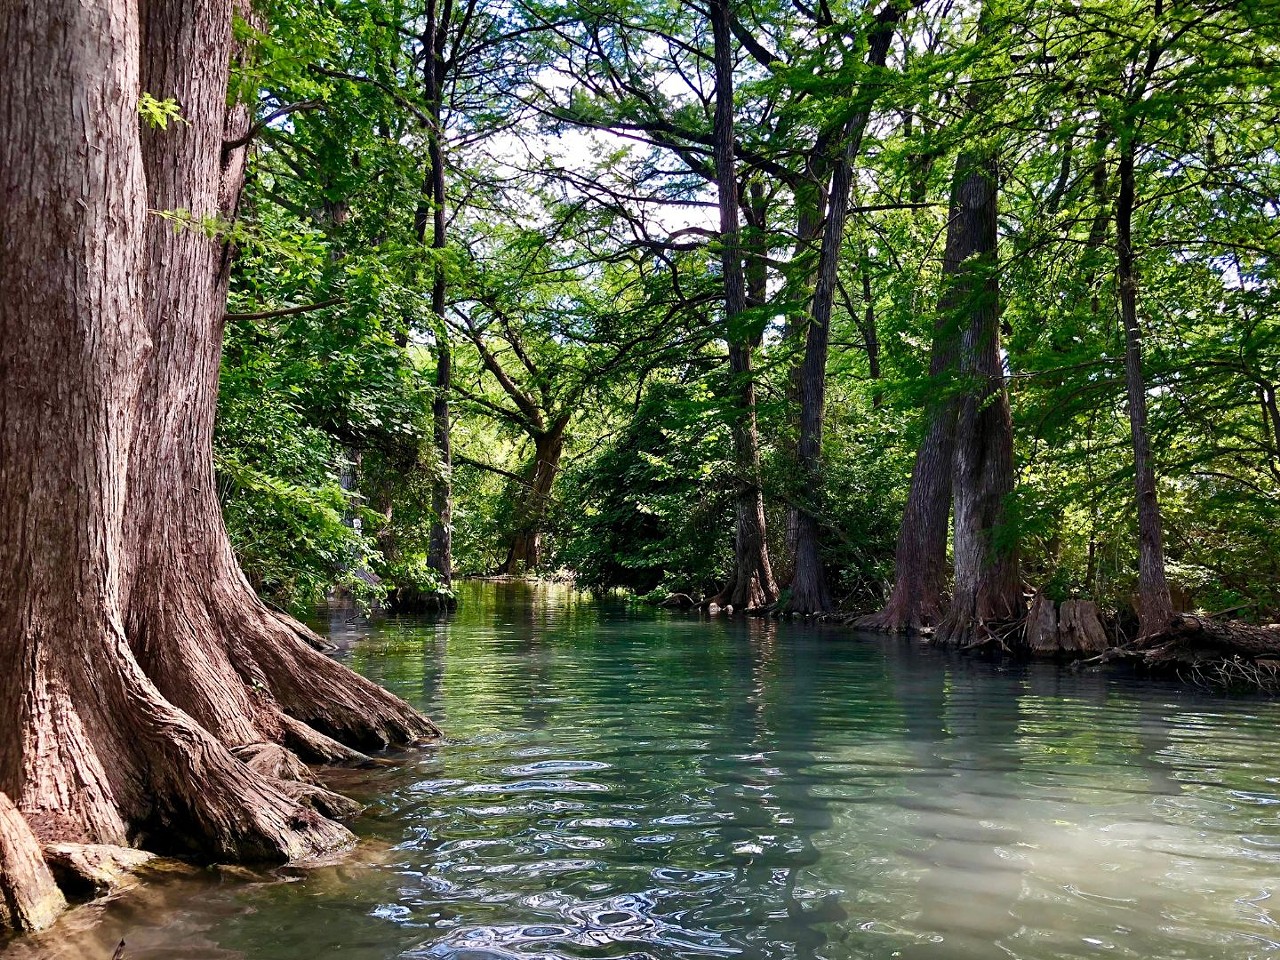 Blue Hole
100 Blue Hole Lane, Wimberley, (512) 660-9111, cityofwimberley.com    
Minutes from downtown Wimberley, Blue Hole makes for a refreshing stop during a day trip to the heart of the Texas Hill Country. Reservations are required, so be sure to plan ahead.